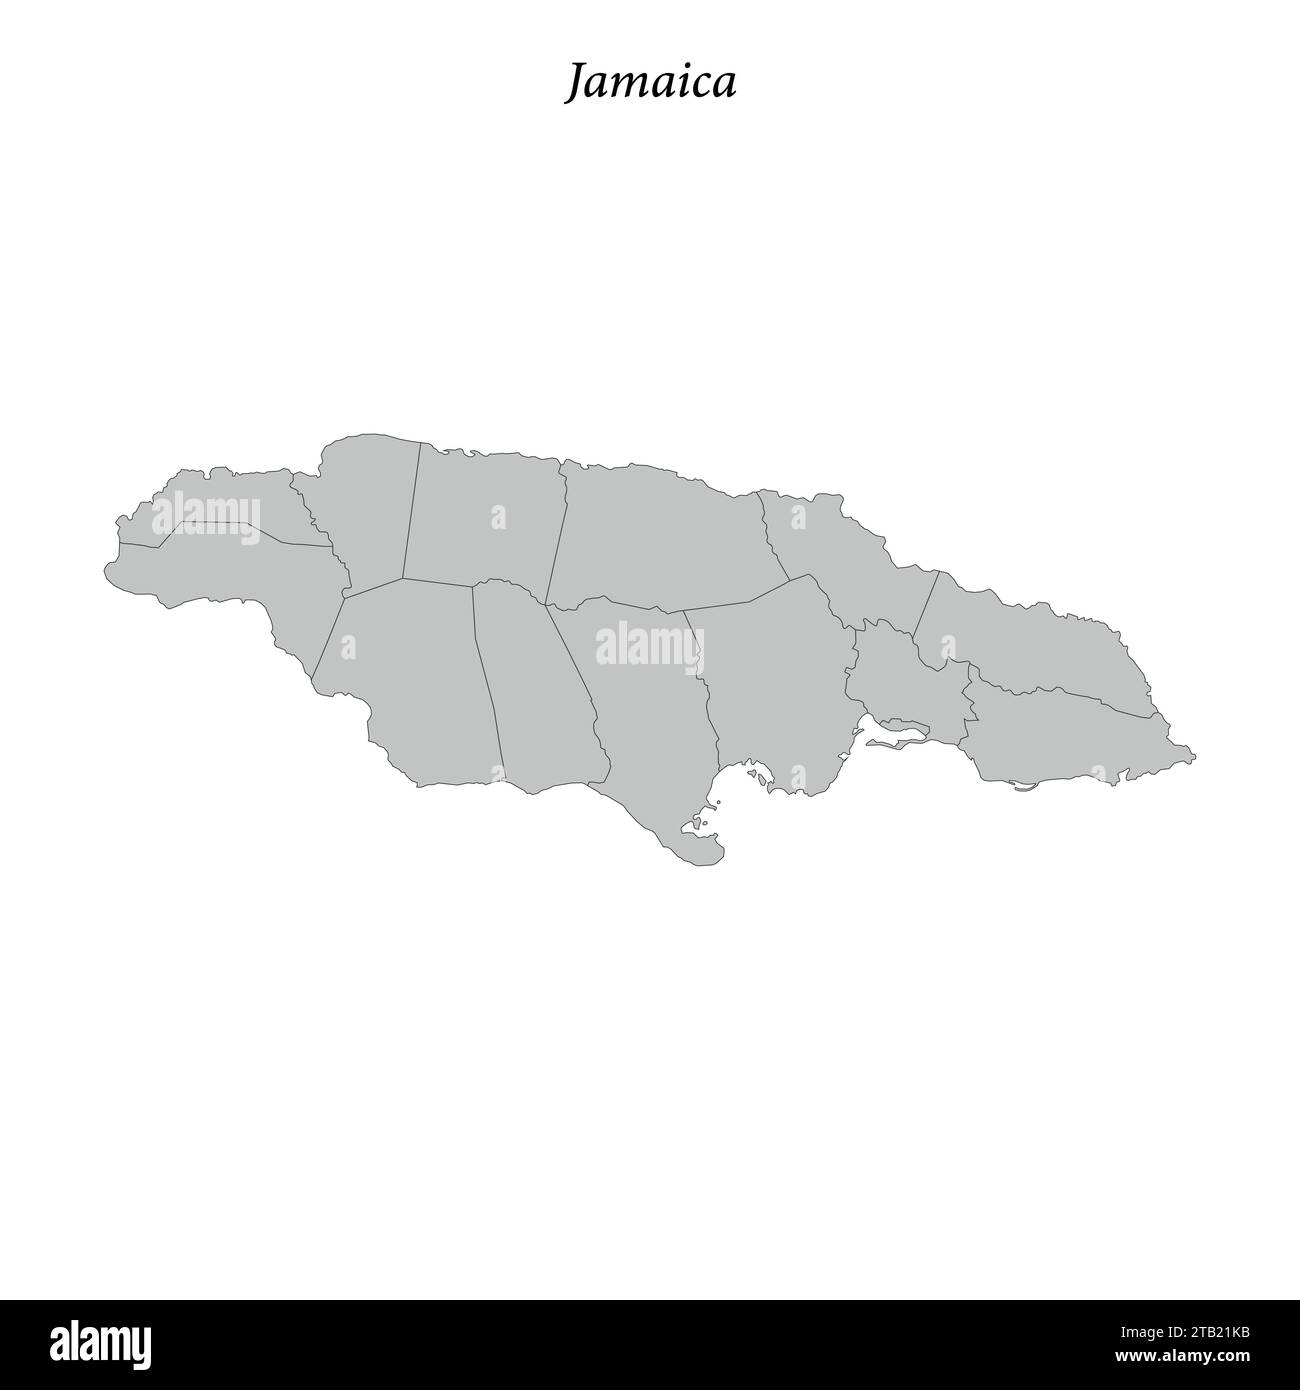 Simple flat Map of Jamaica with district borders Stock Vector